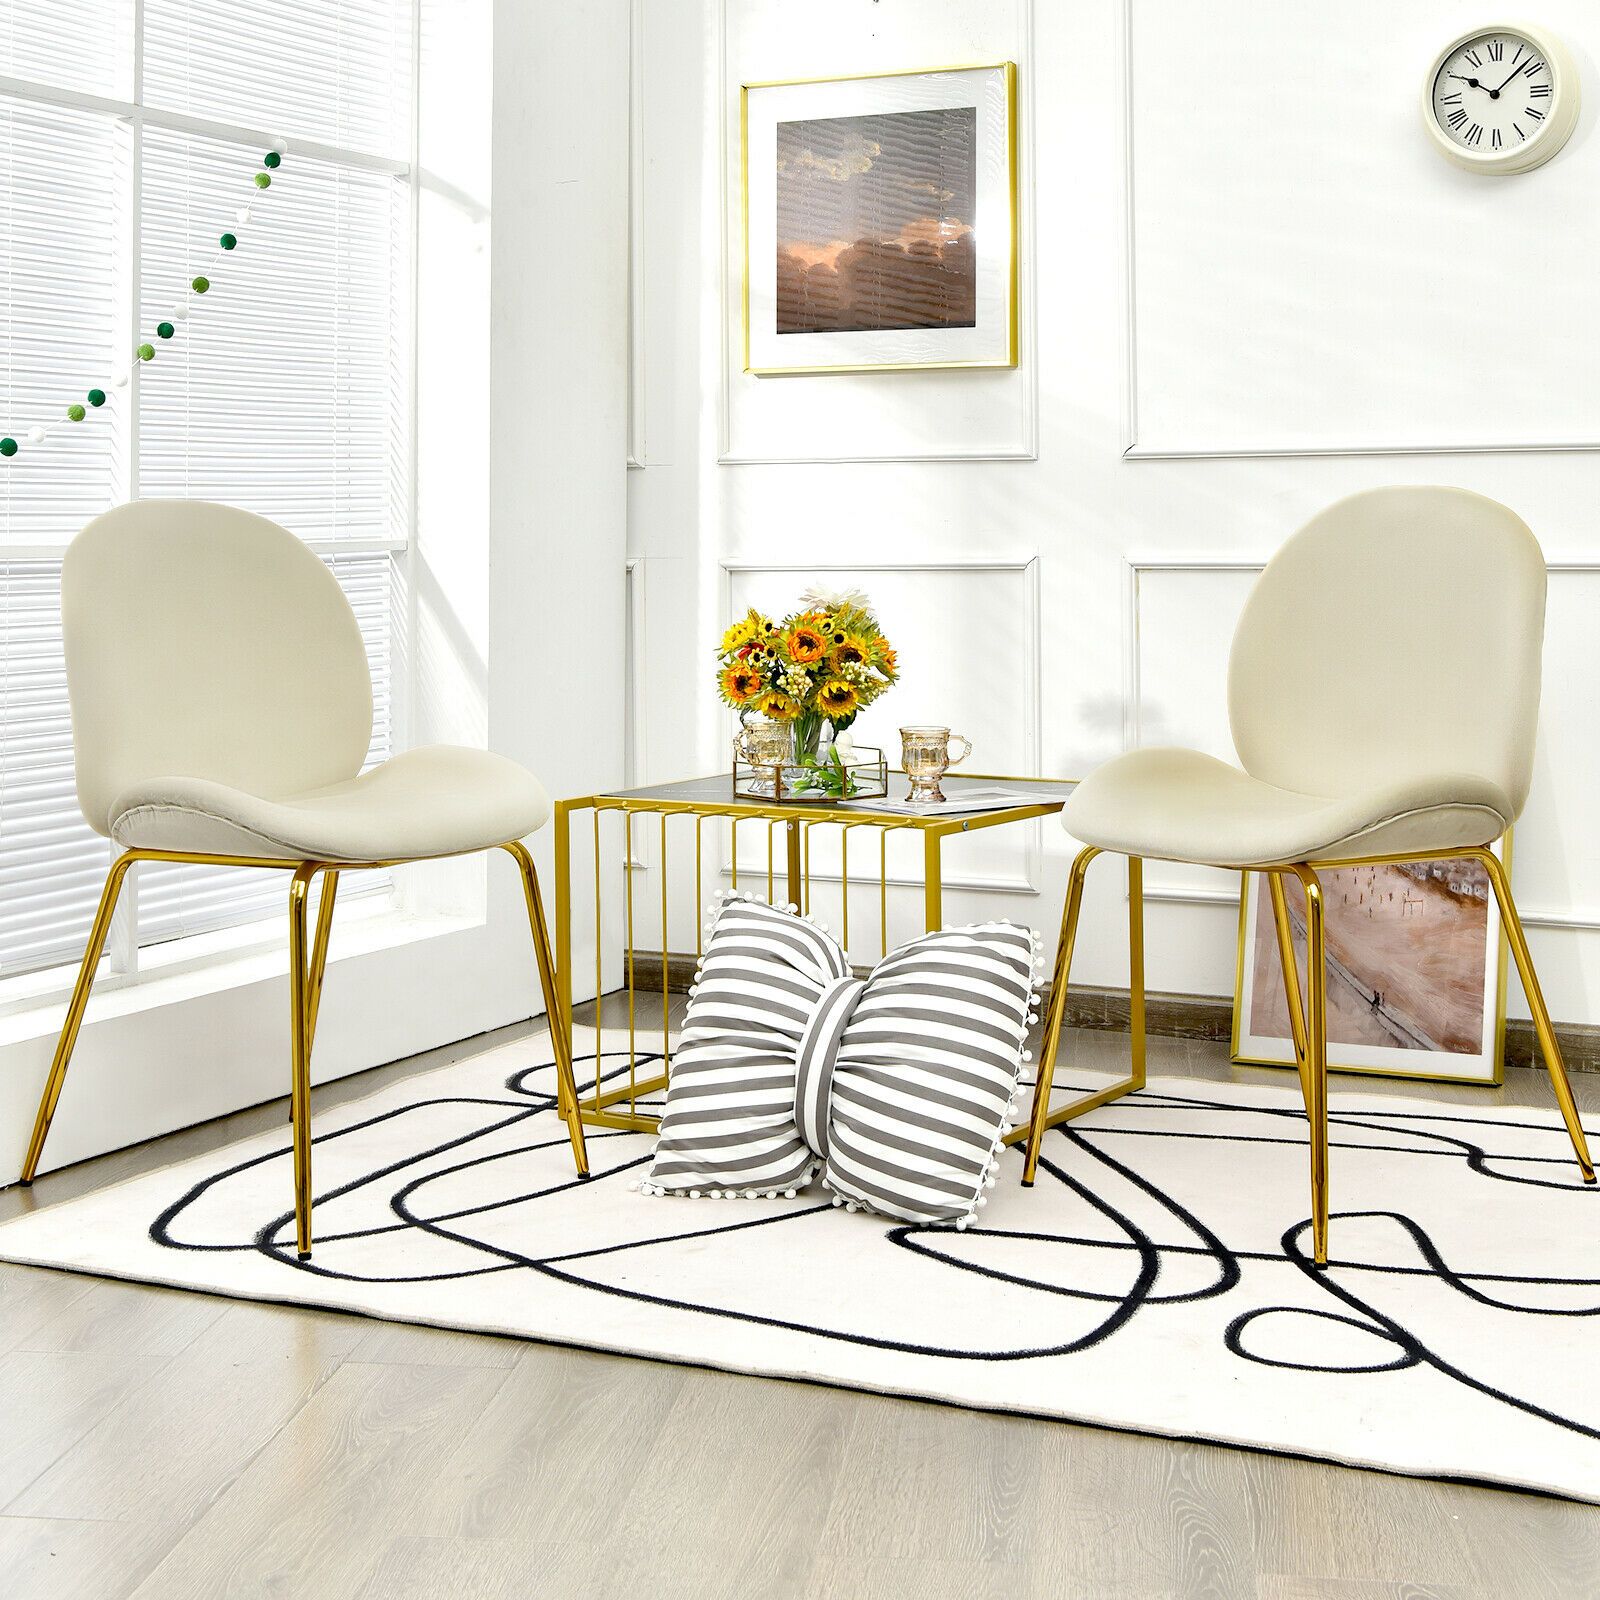 Set of 2 Velvet Dining Chair with Gold Metal Legs